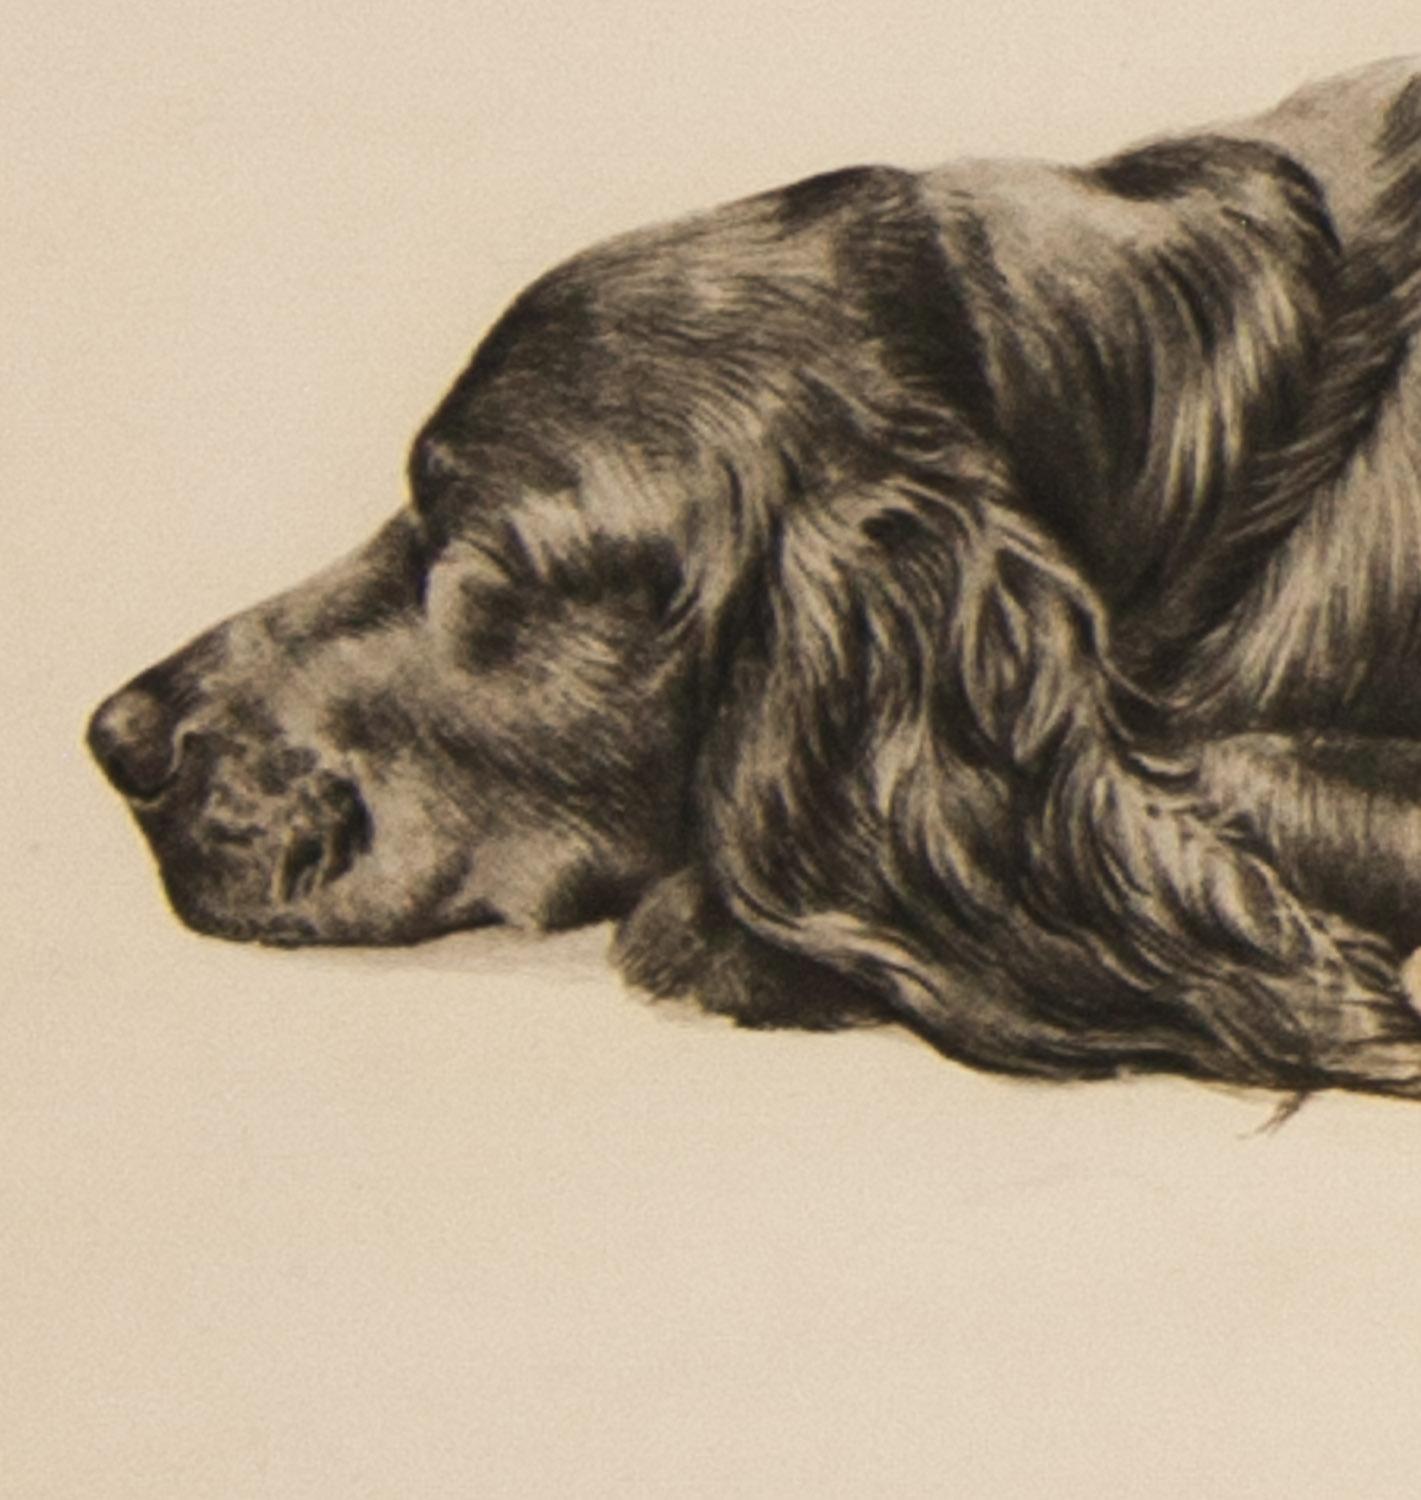    Three Cocker Spaniels is an original color etching by well known French sports artist Leon Danchin. The three Spaniels are in waiting mode with two lying down and one sitting and they look as though they know they are sitting for their portrait.